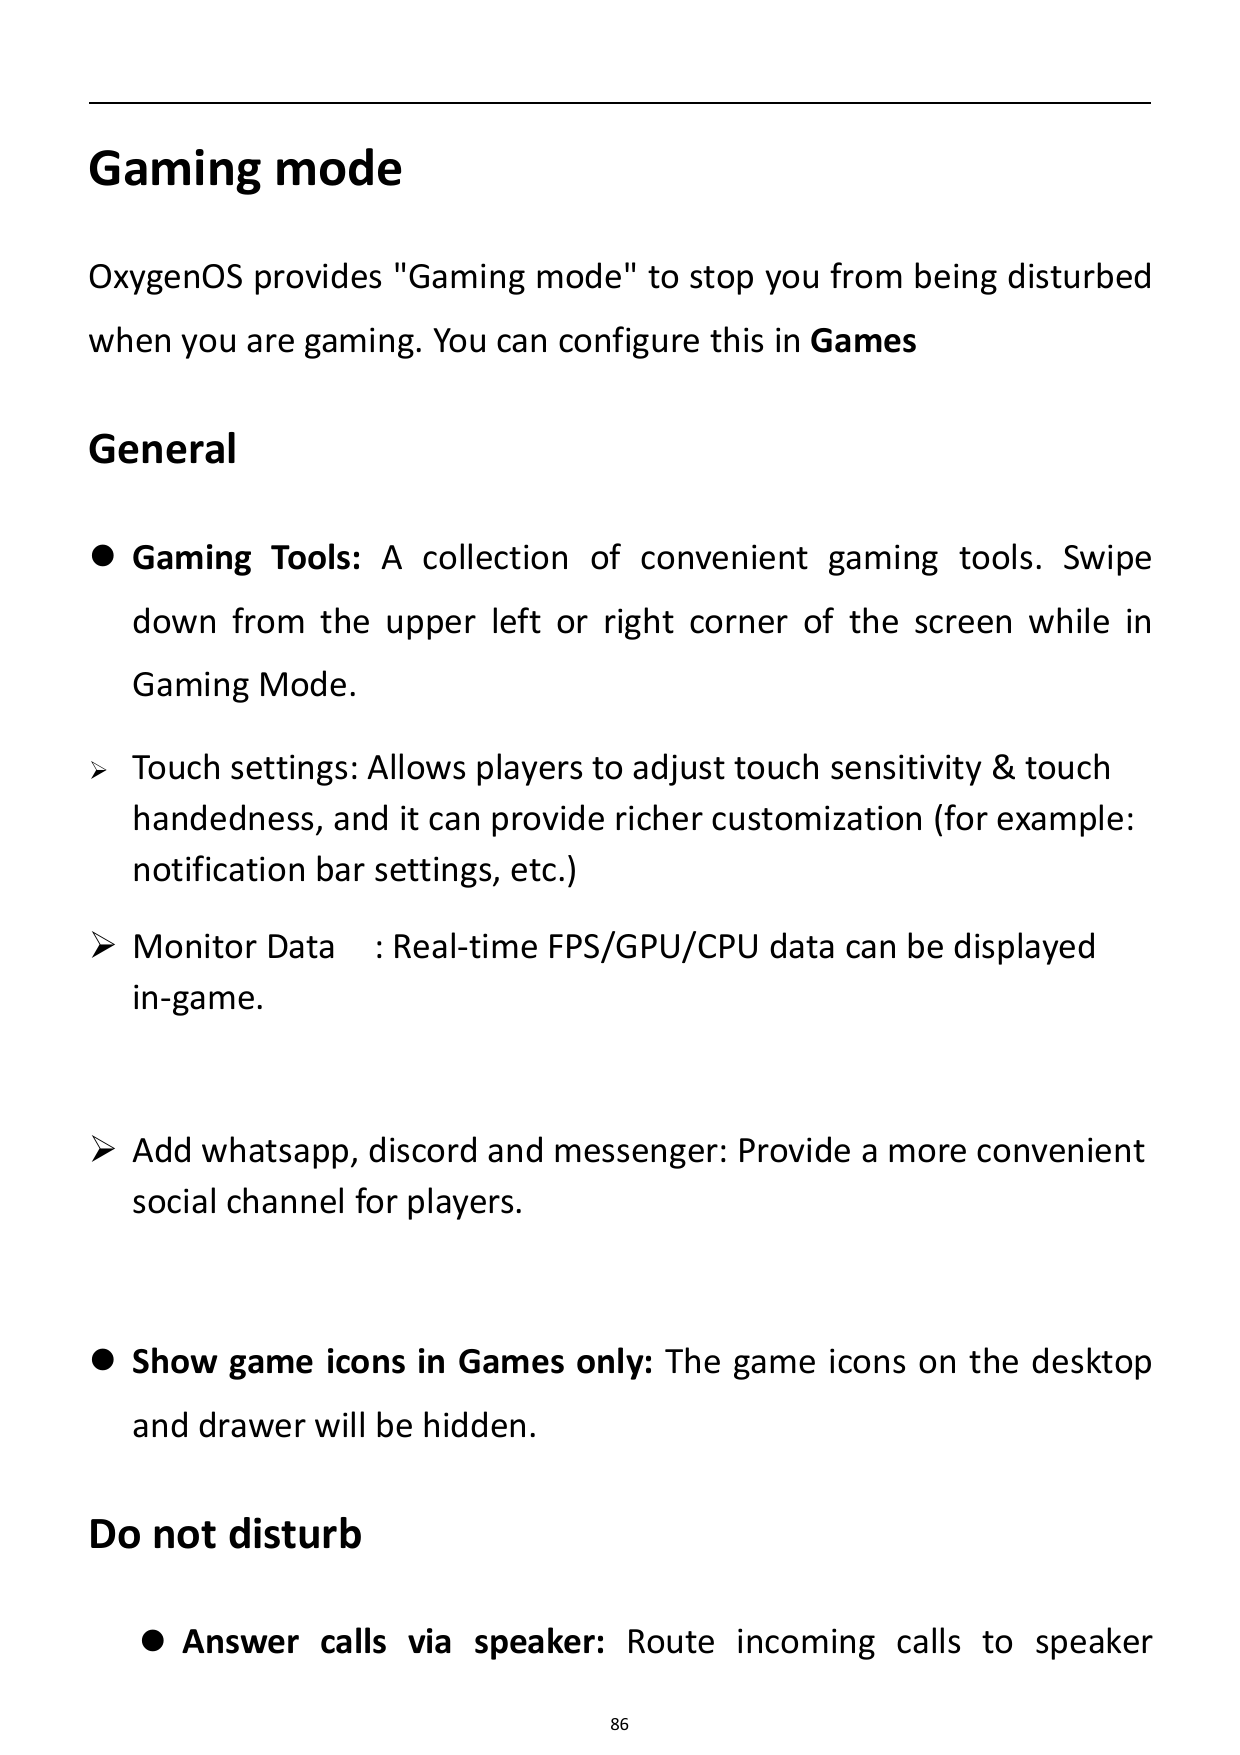 Gaming modeOxygenOS provides "Gaming mode" to stop you from being disturbedwhen you are gaming. You can configure this in GamesG